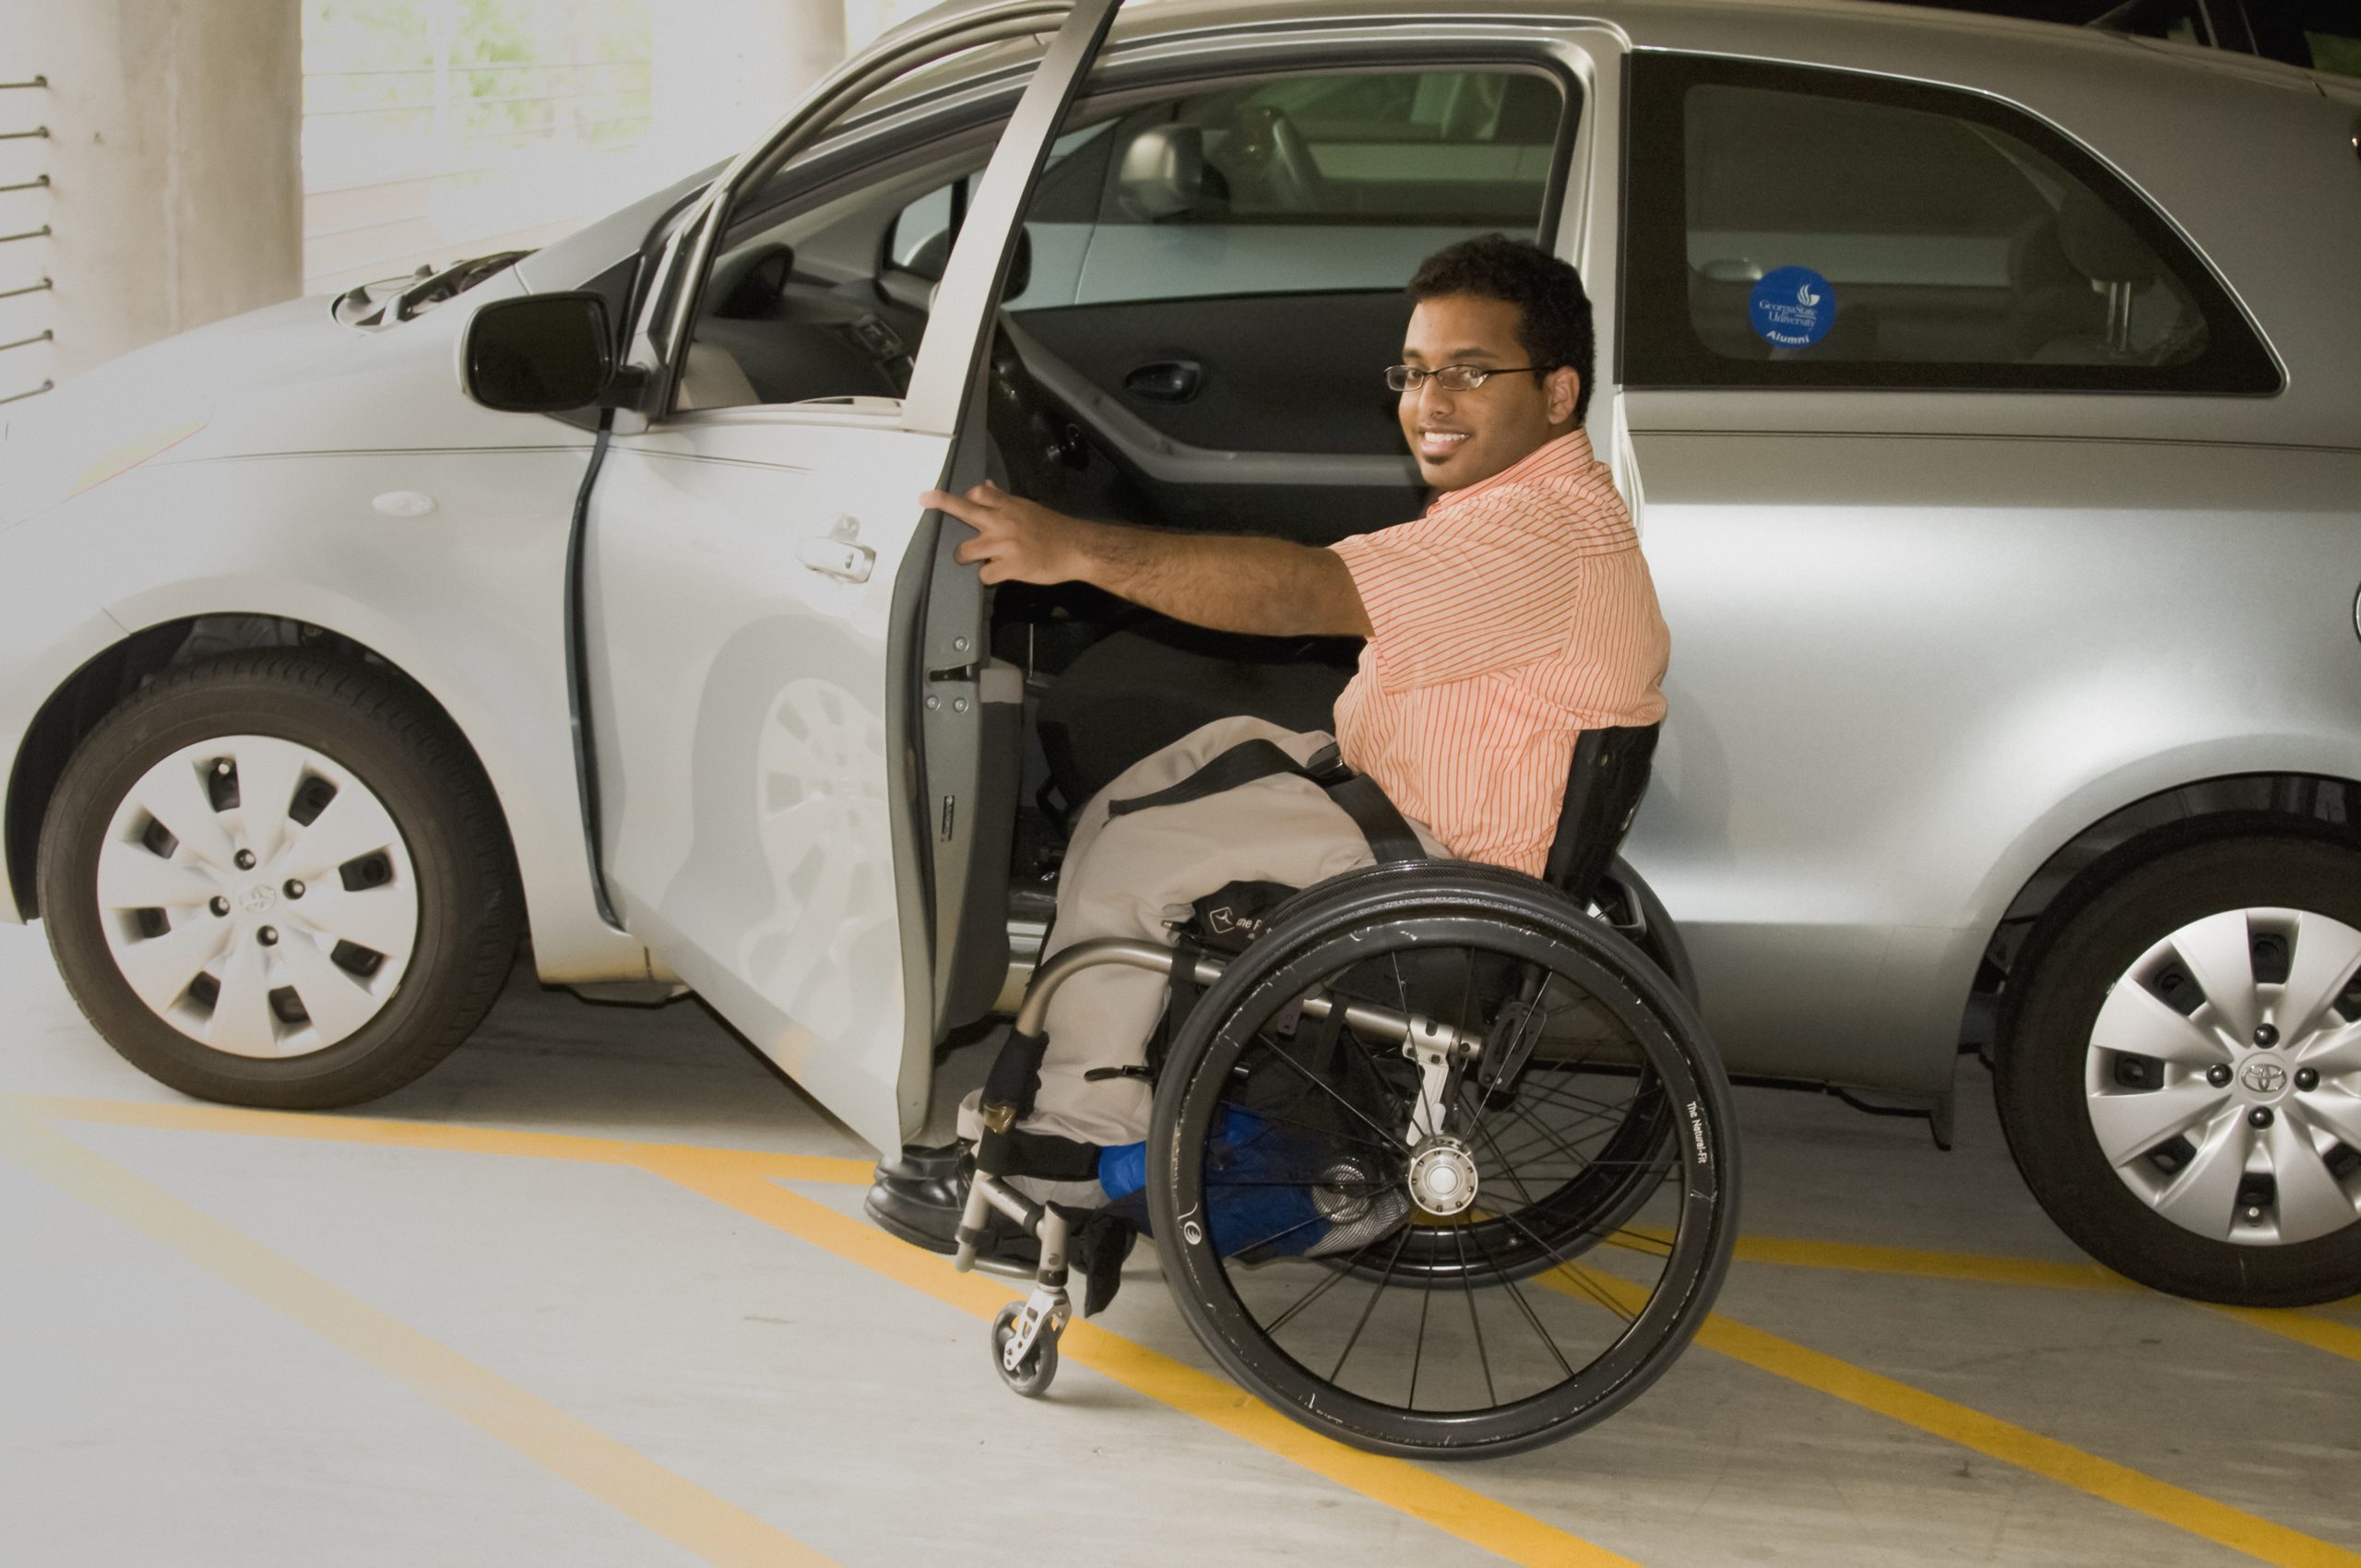 A wheelchair user opens a silver car door and prepares to get in. He is wearing a peach shirt and light coloured trousers